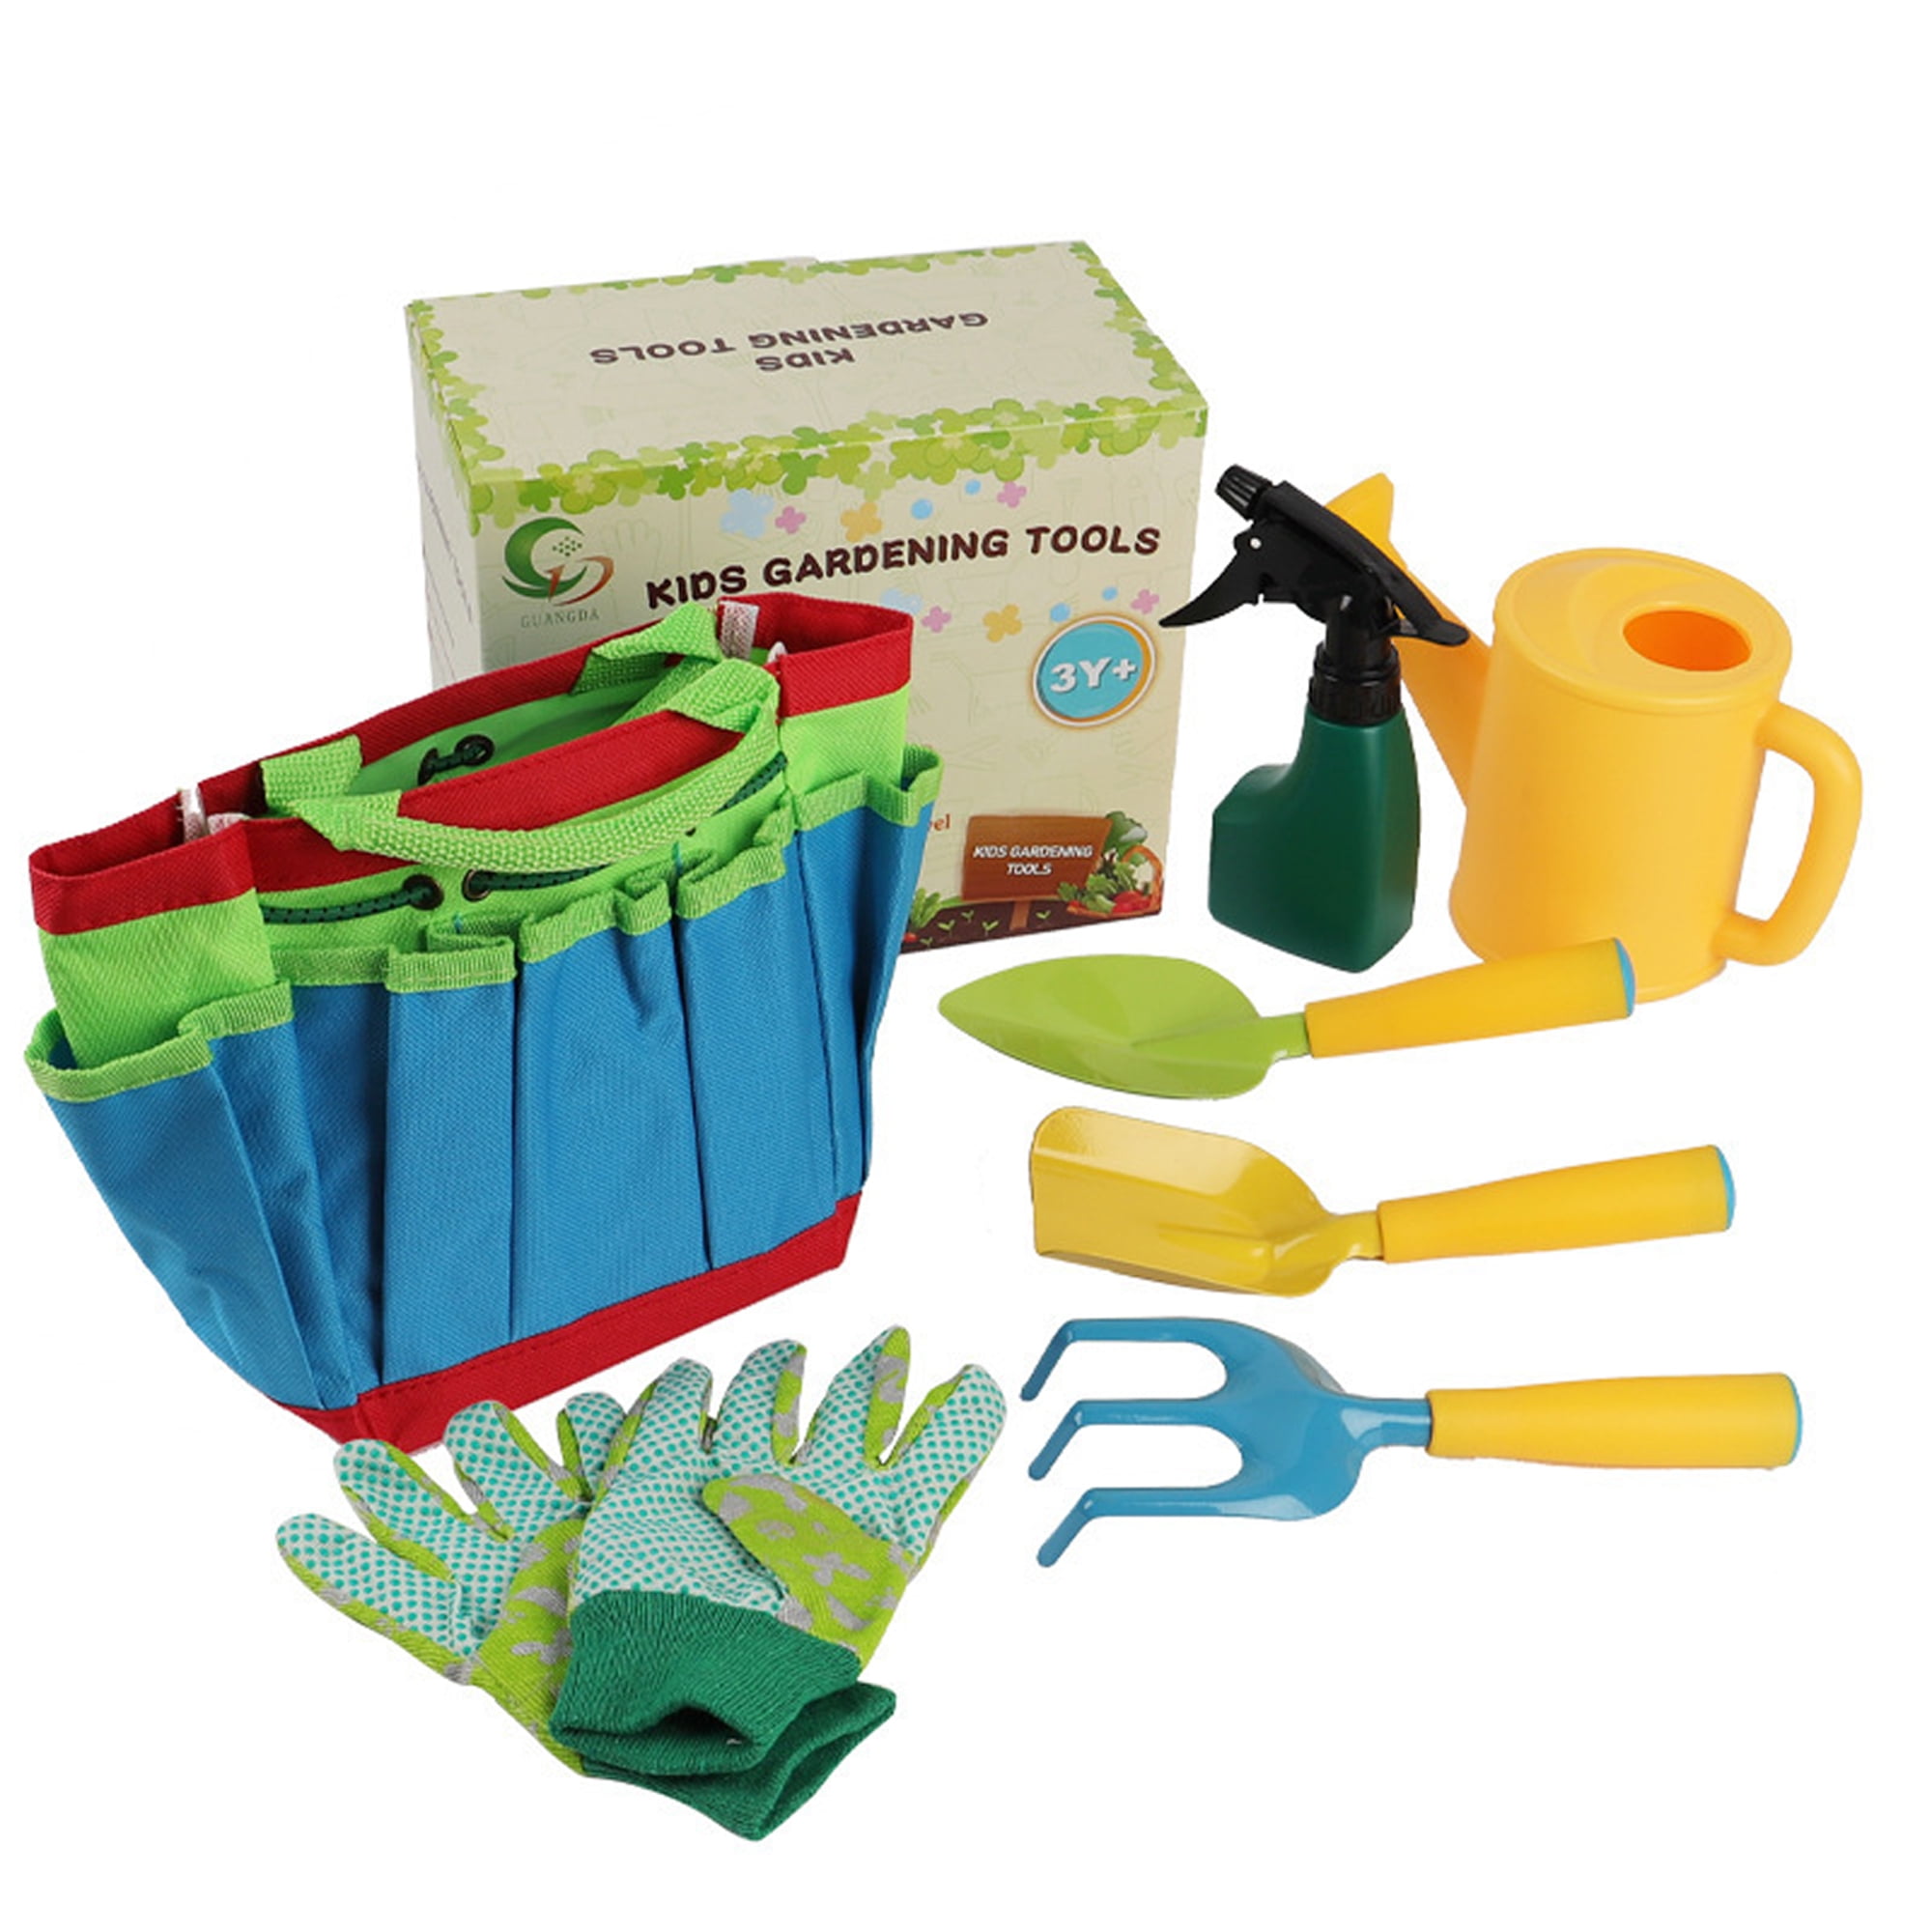 COUTEXYI Kids Gardening Tools Set, Assorted Color Multi-purpose Garden ...